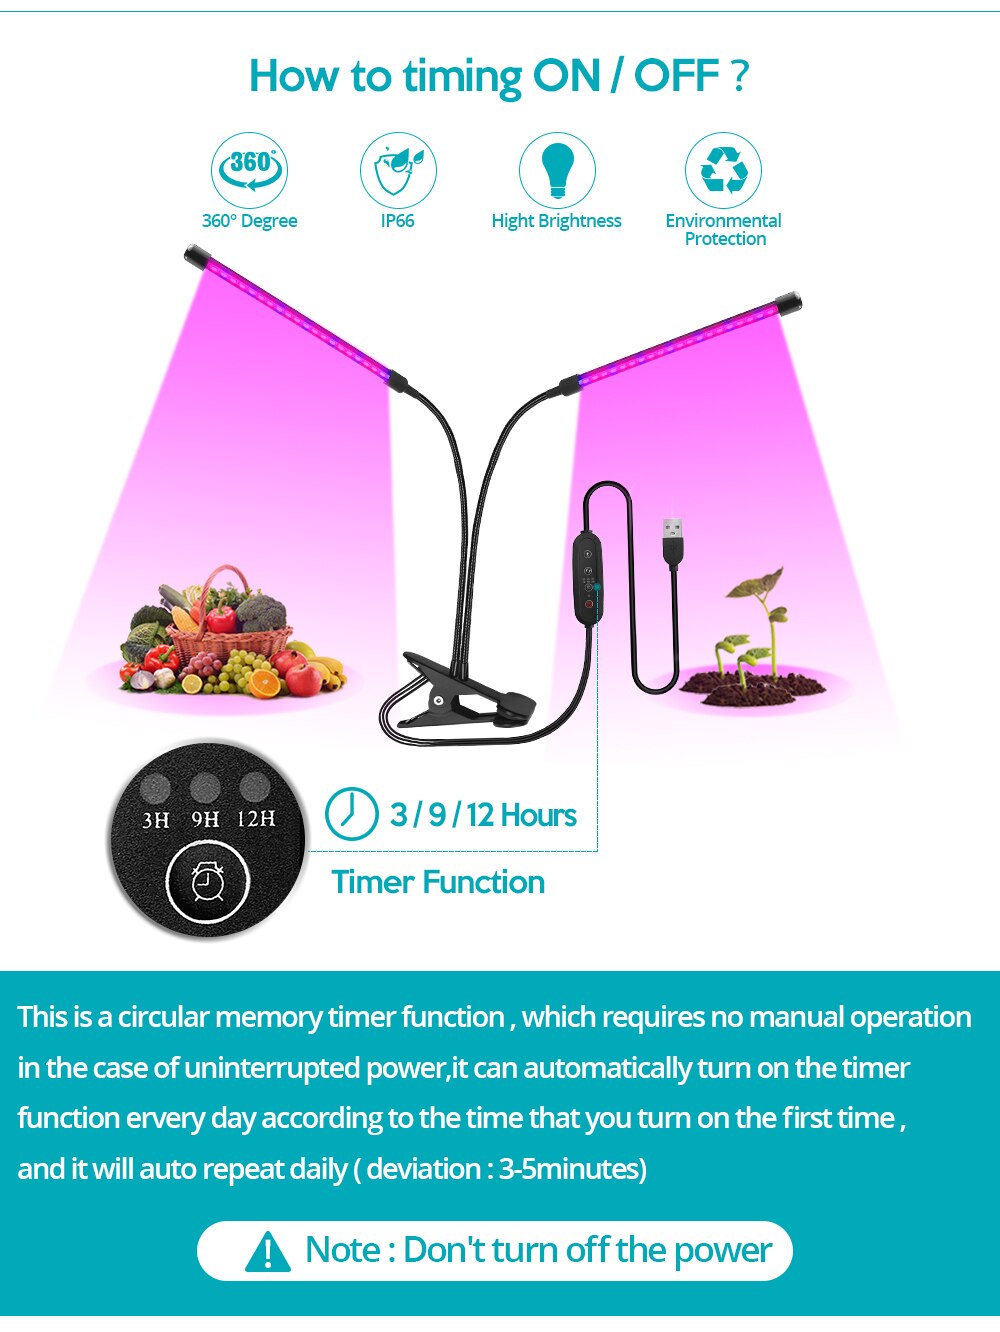 4 Heads USB LED Grow Light Full Spectrum Desktop Clip Phytolamps 9W 18W 27W Phyto Lamp for Plants Flower Greenhouse Hydroponic